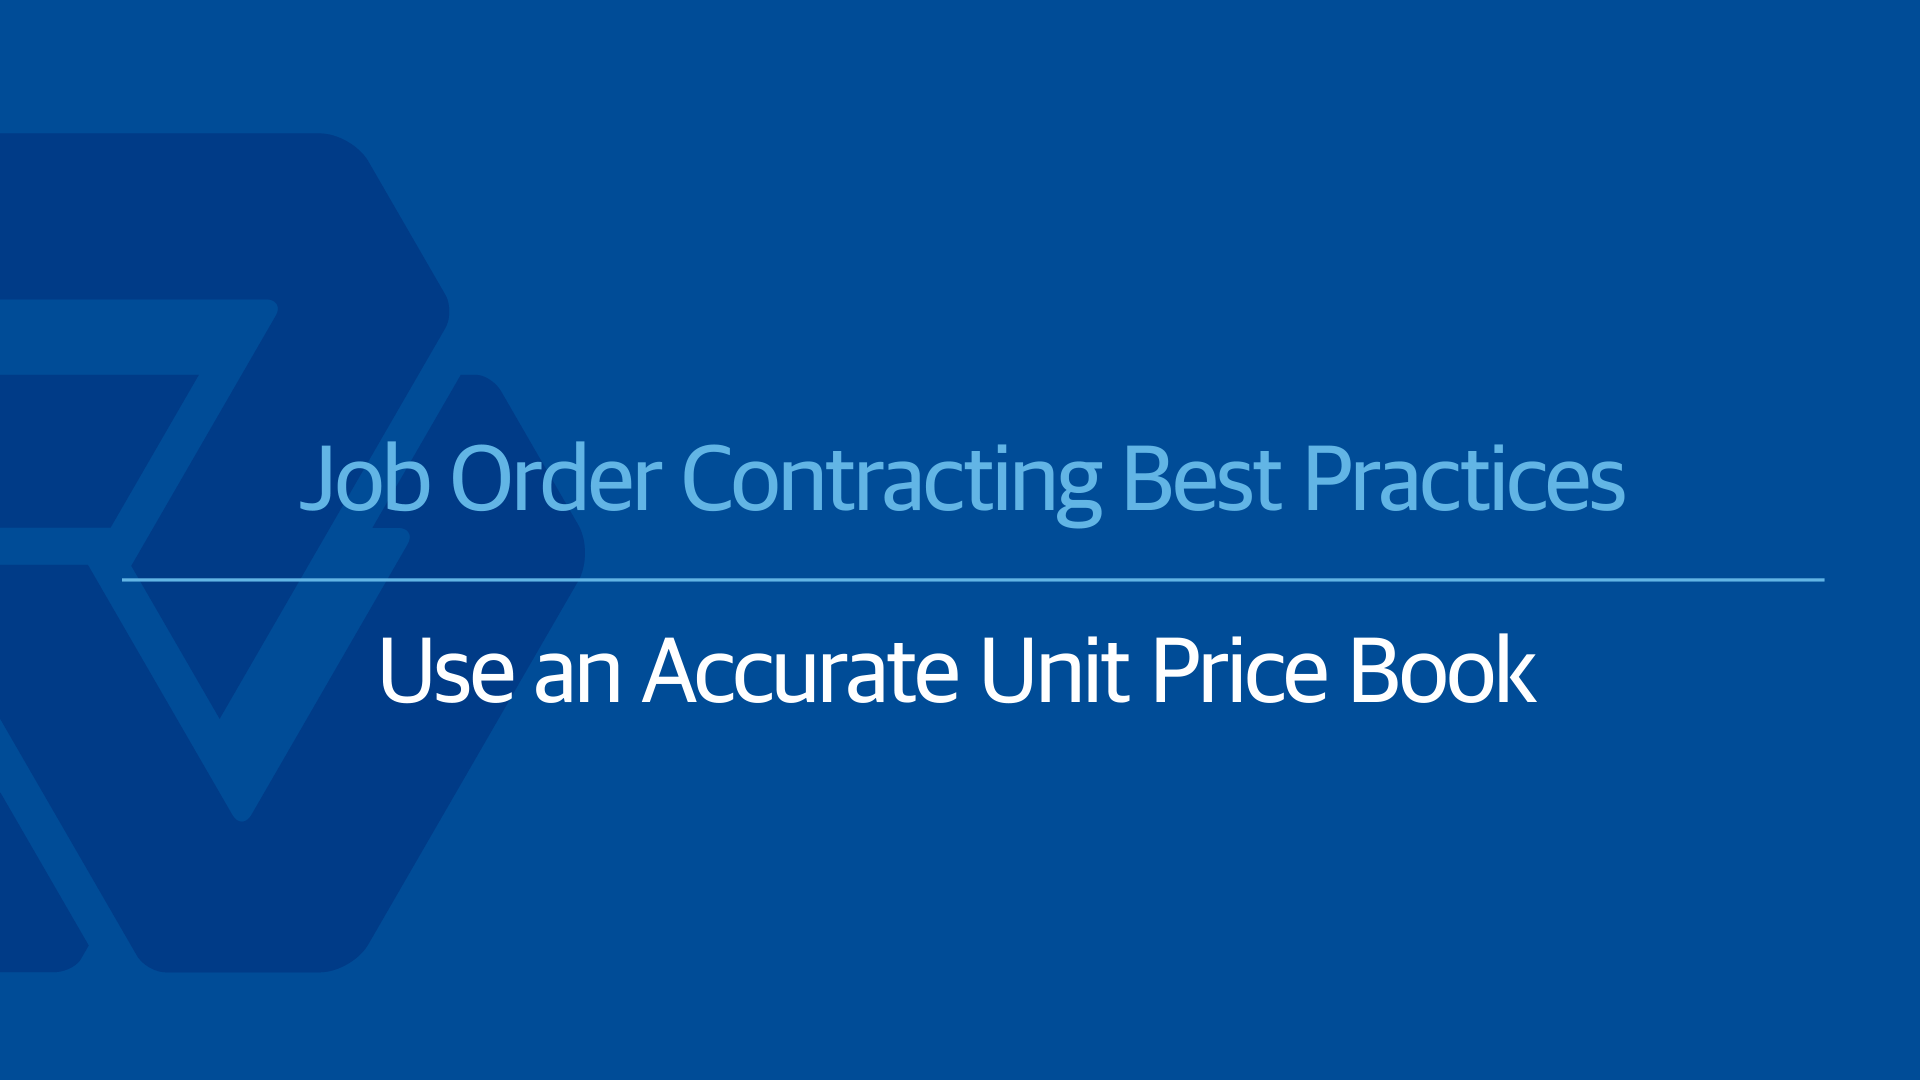 Job Order Contracting Best Practices: The Unit Price Book 1